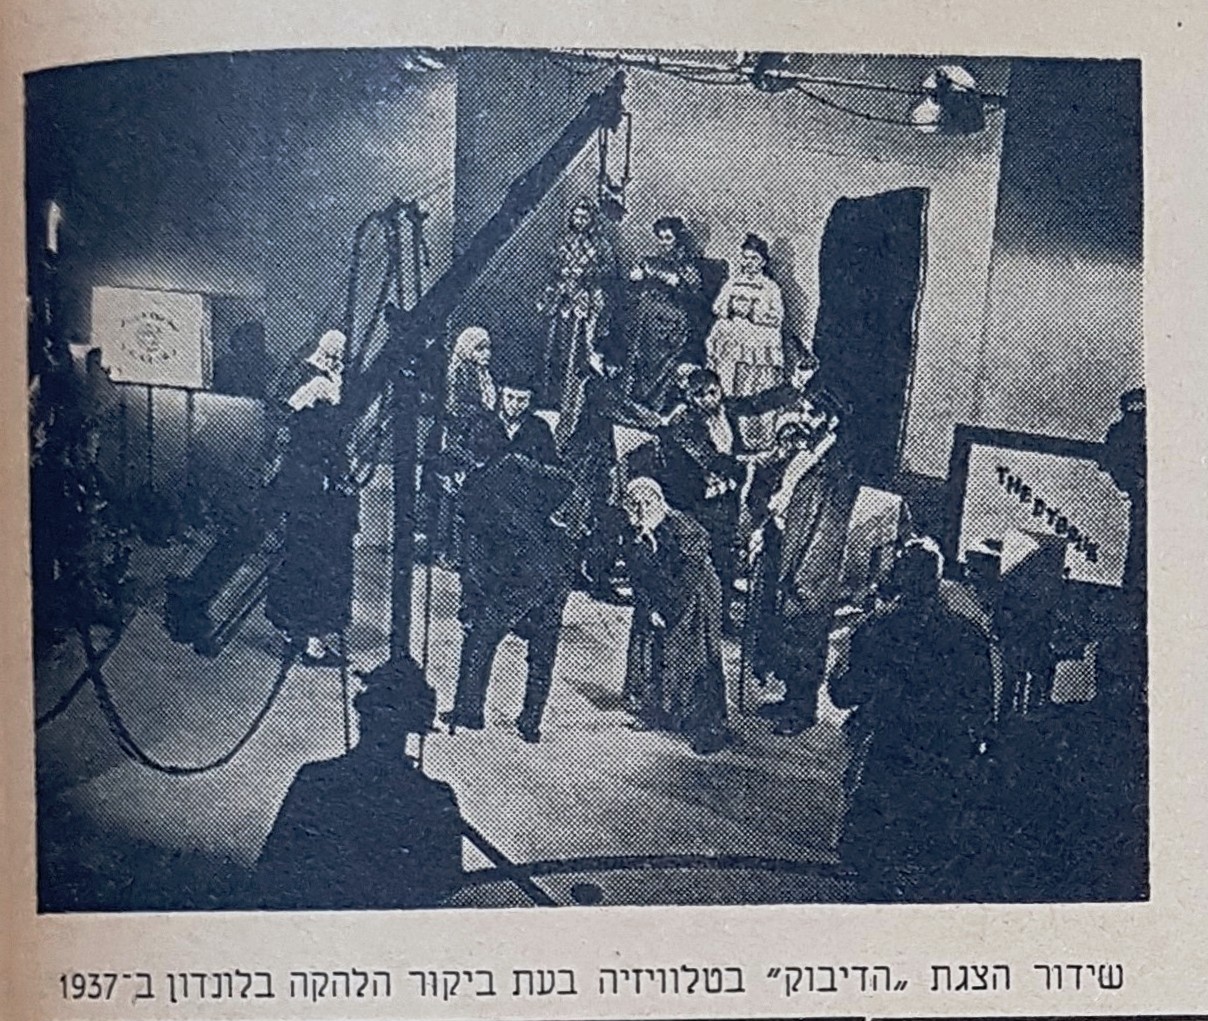 Performance of the Dybbuk, by Shloyme Ansky, for television, broadcast in London  Friday 19 November, 1937 at 15:20.